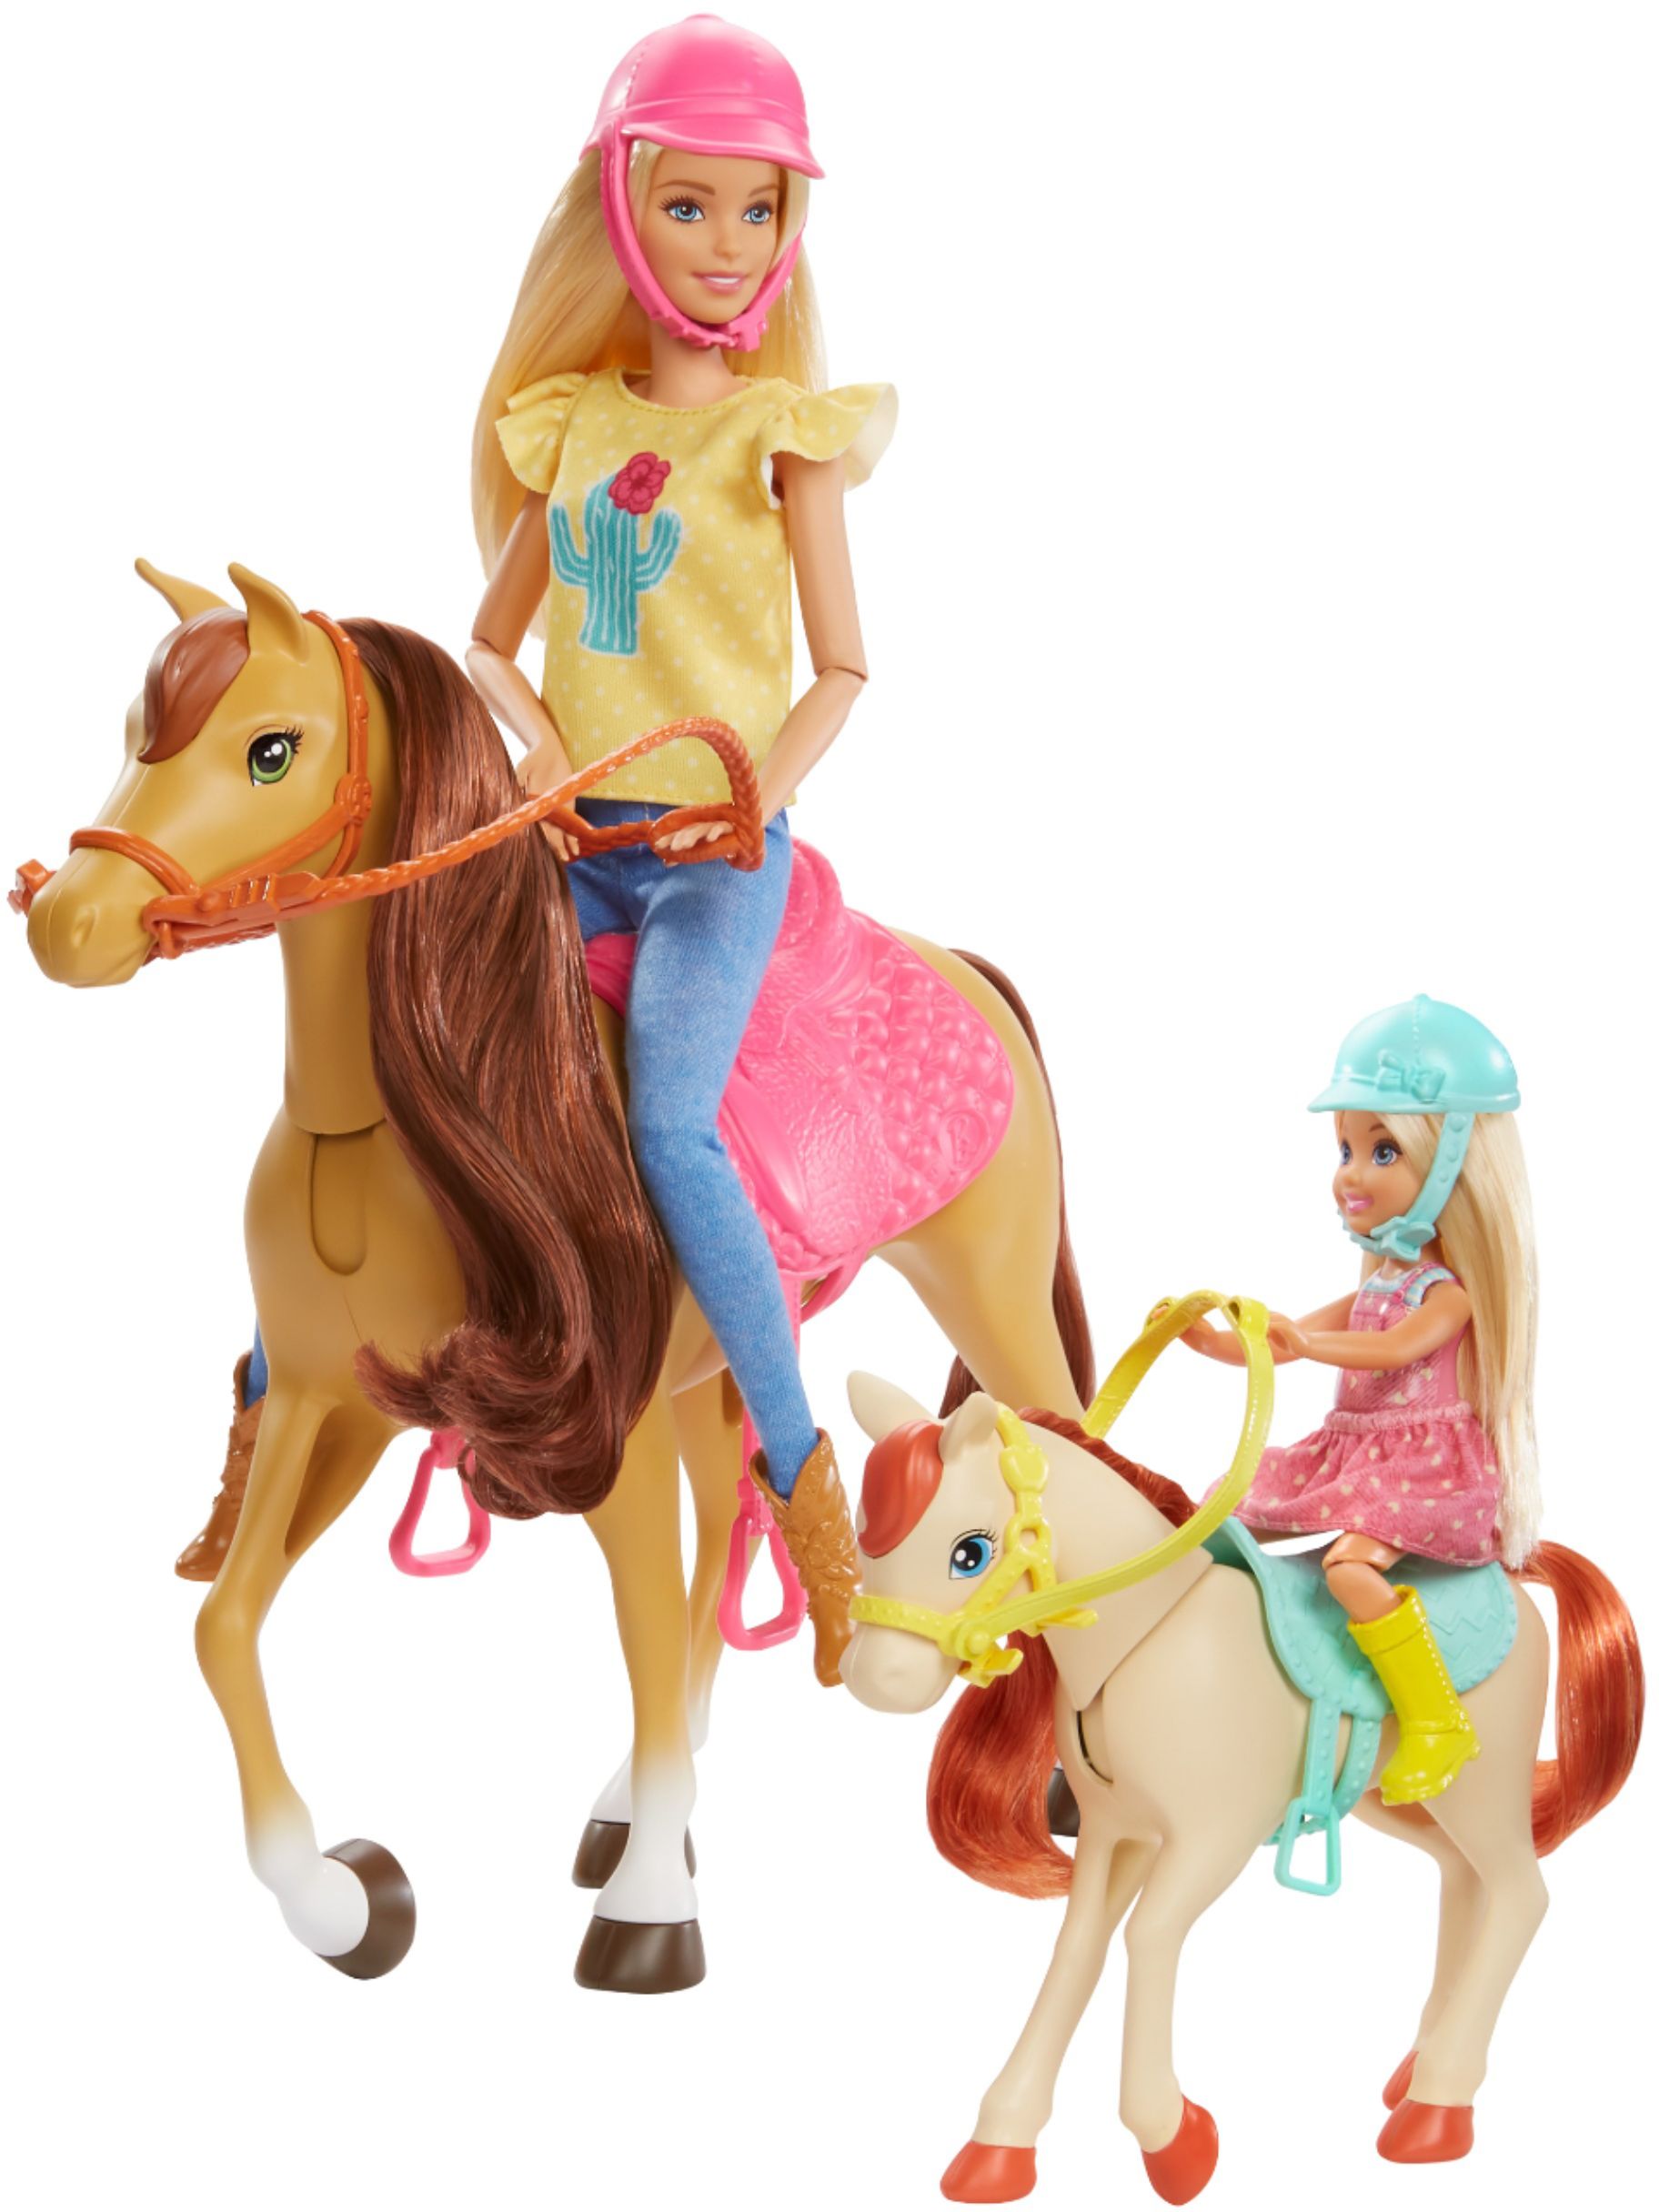 Barbie Doll and Horse FXH13 Character Doll Set Girls Toys Mattel Saddle Ride On 